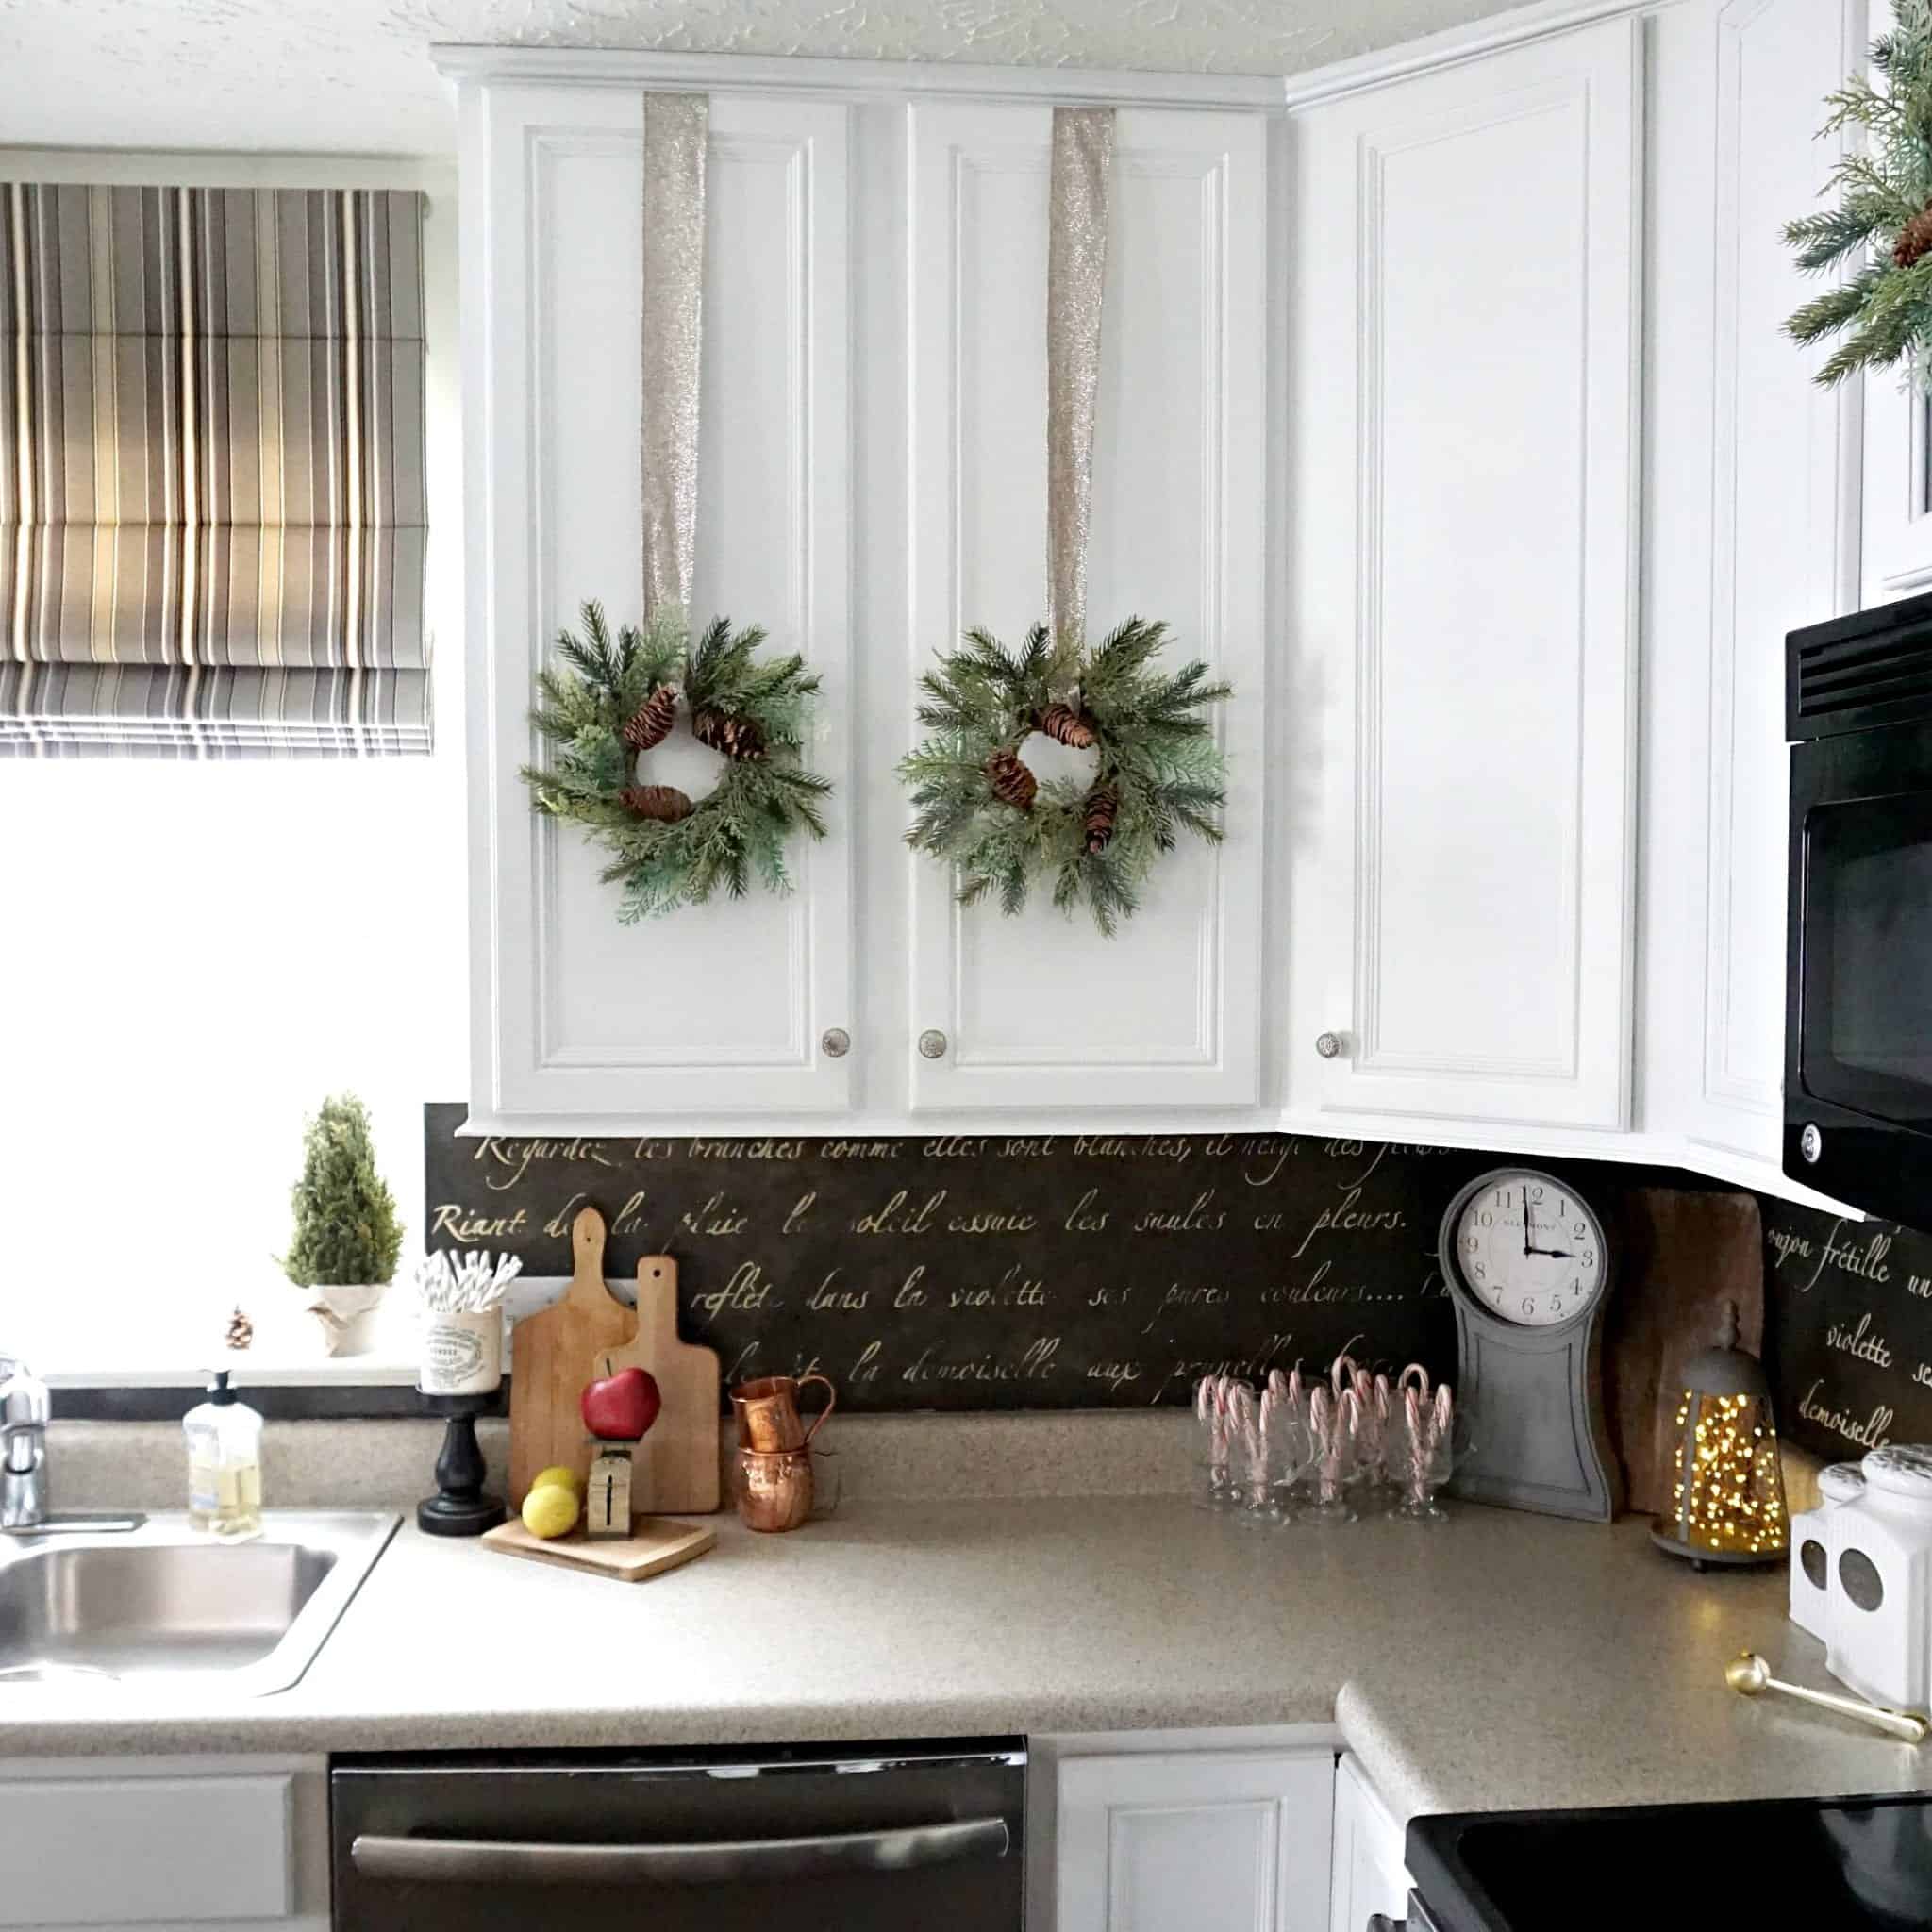 Modern Rustic Holiday Home Tour 2017 Kitchen Partial View of Cabinets